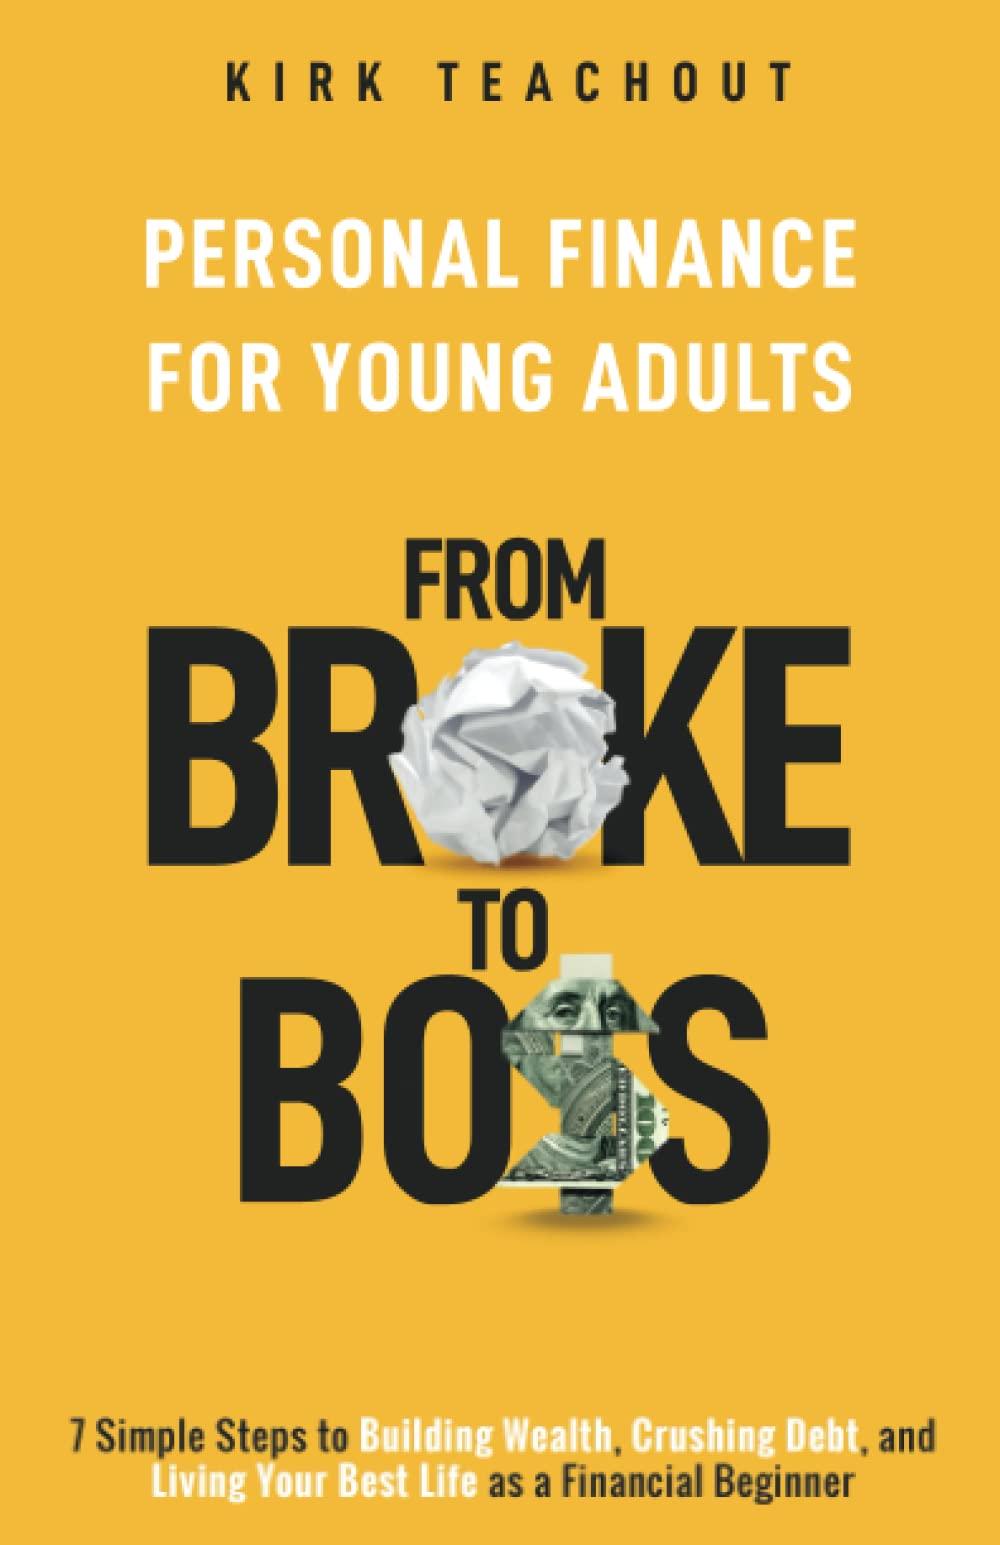 Personal Finance For Young Adults From Broke To Boss 7 Simple Steps To Building Wealth Crushing Debt And Living Your Best Life As A Financial Beginner